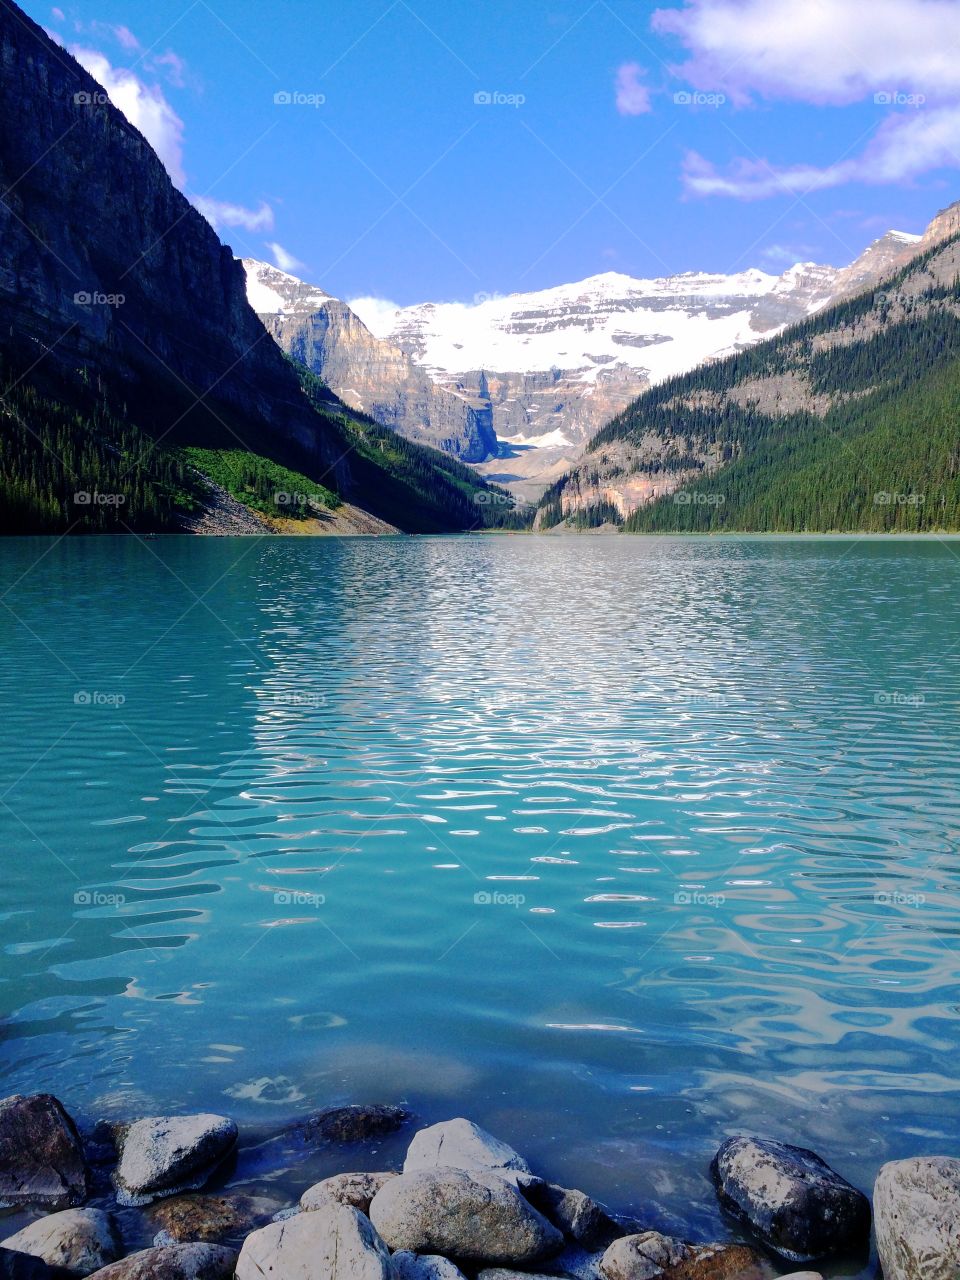 My first time visiting Lake Louise